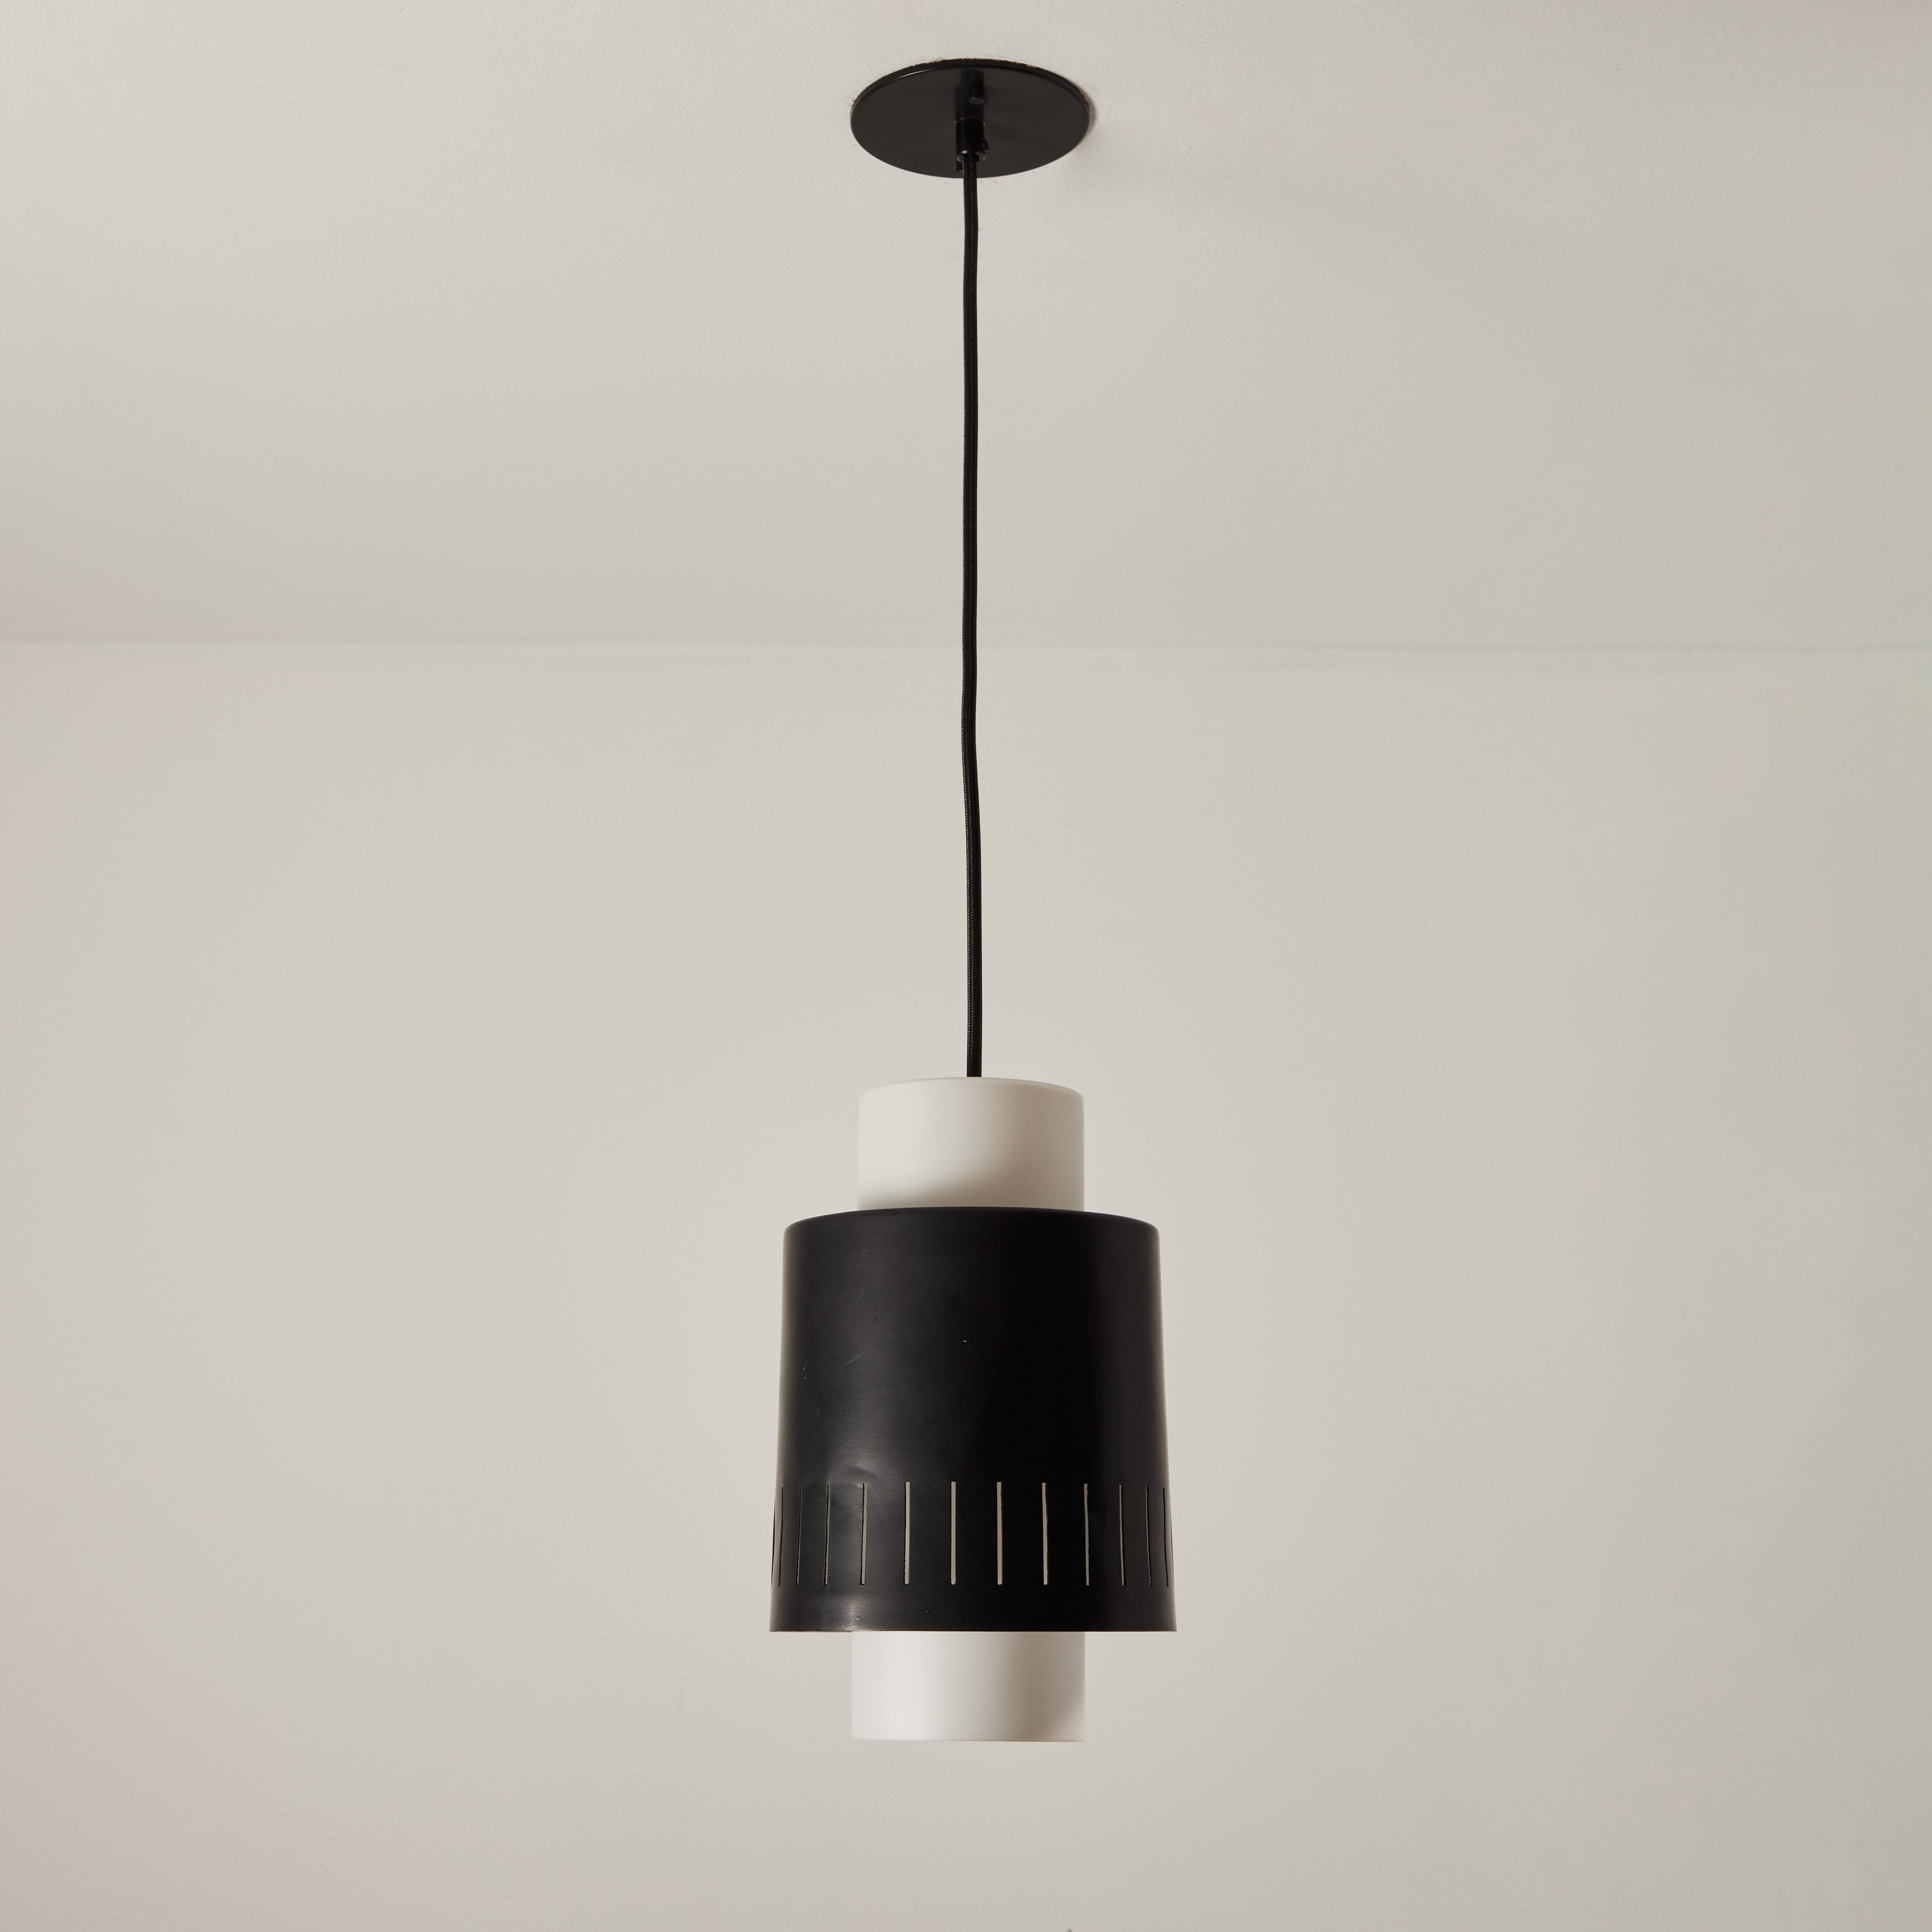 Mid-20th Century 1960s Glass & Perforated Metal Pendant Attributed to Bruno Gatta for Stilnovo For Sale